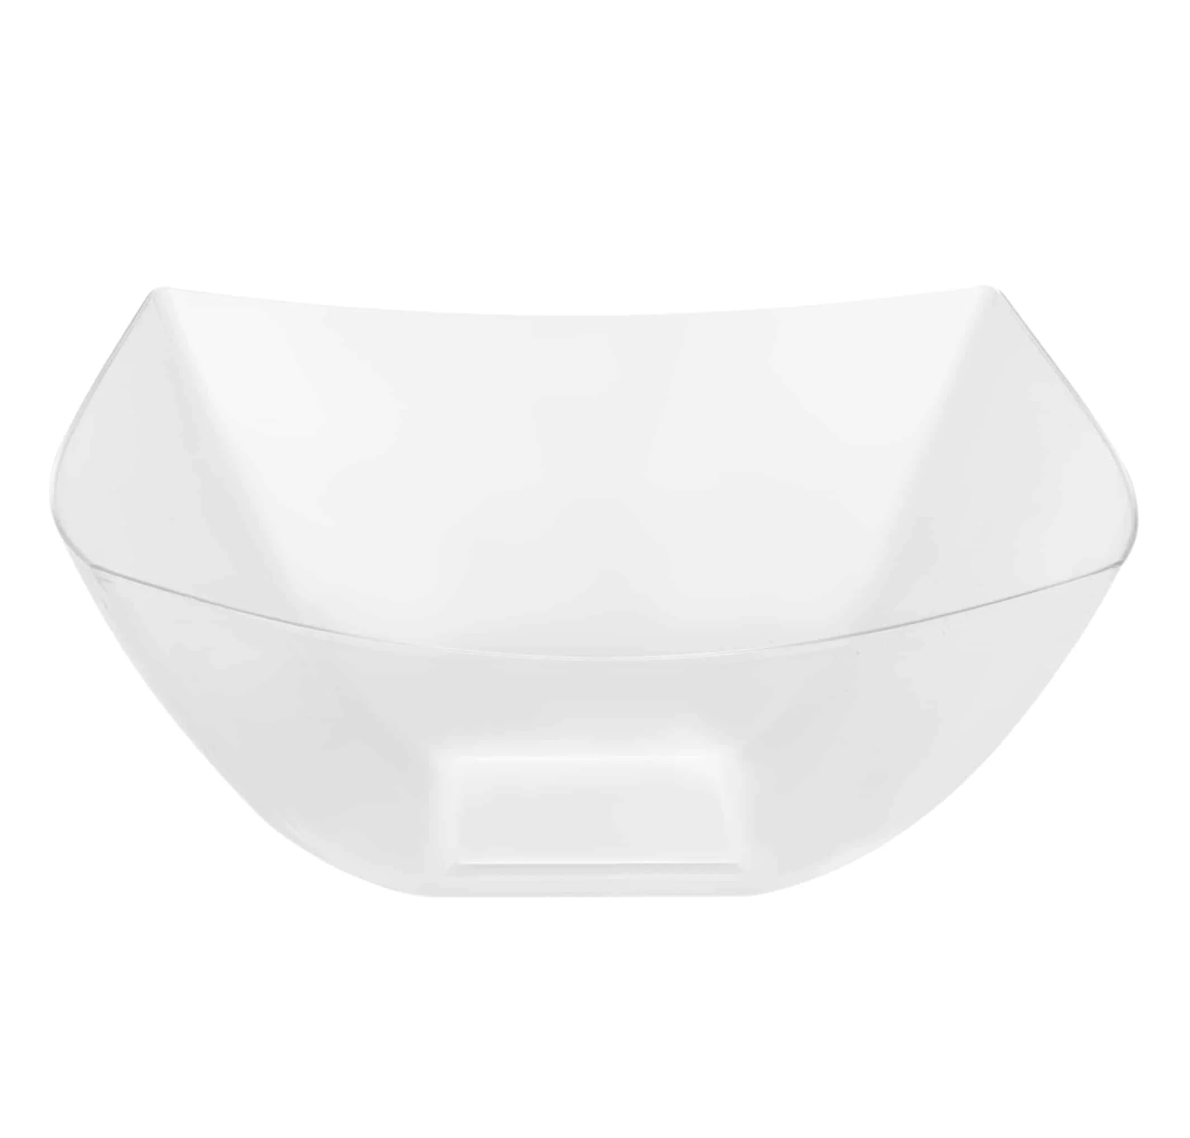 Served Vacuum-Insulated Small Serving Bowl – 20oz - Golden